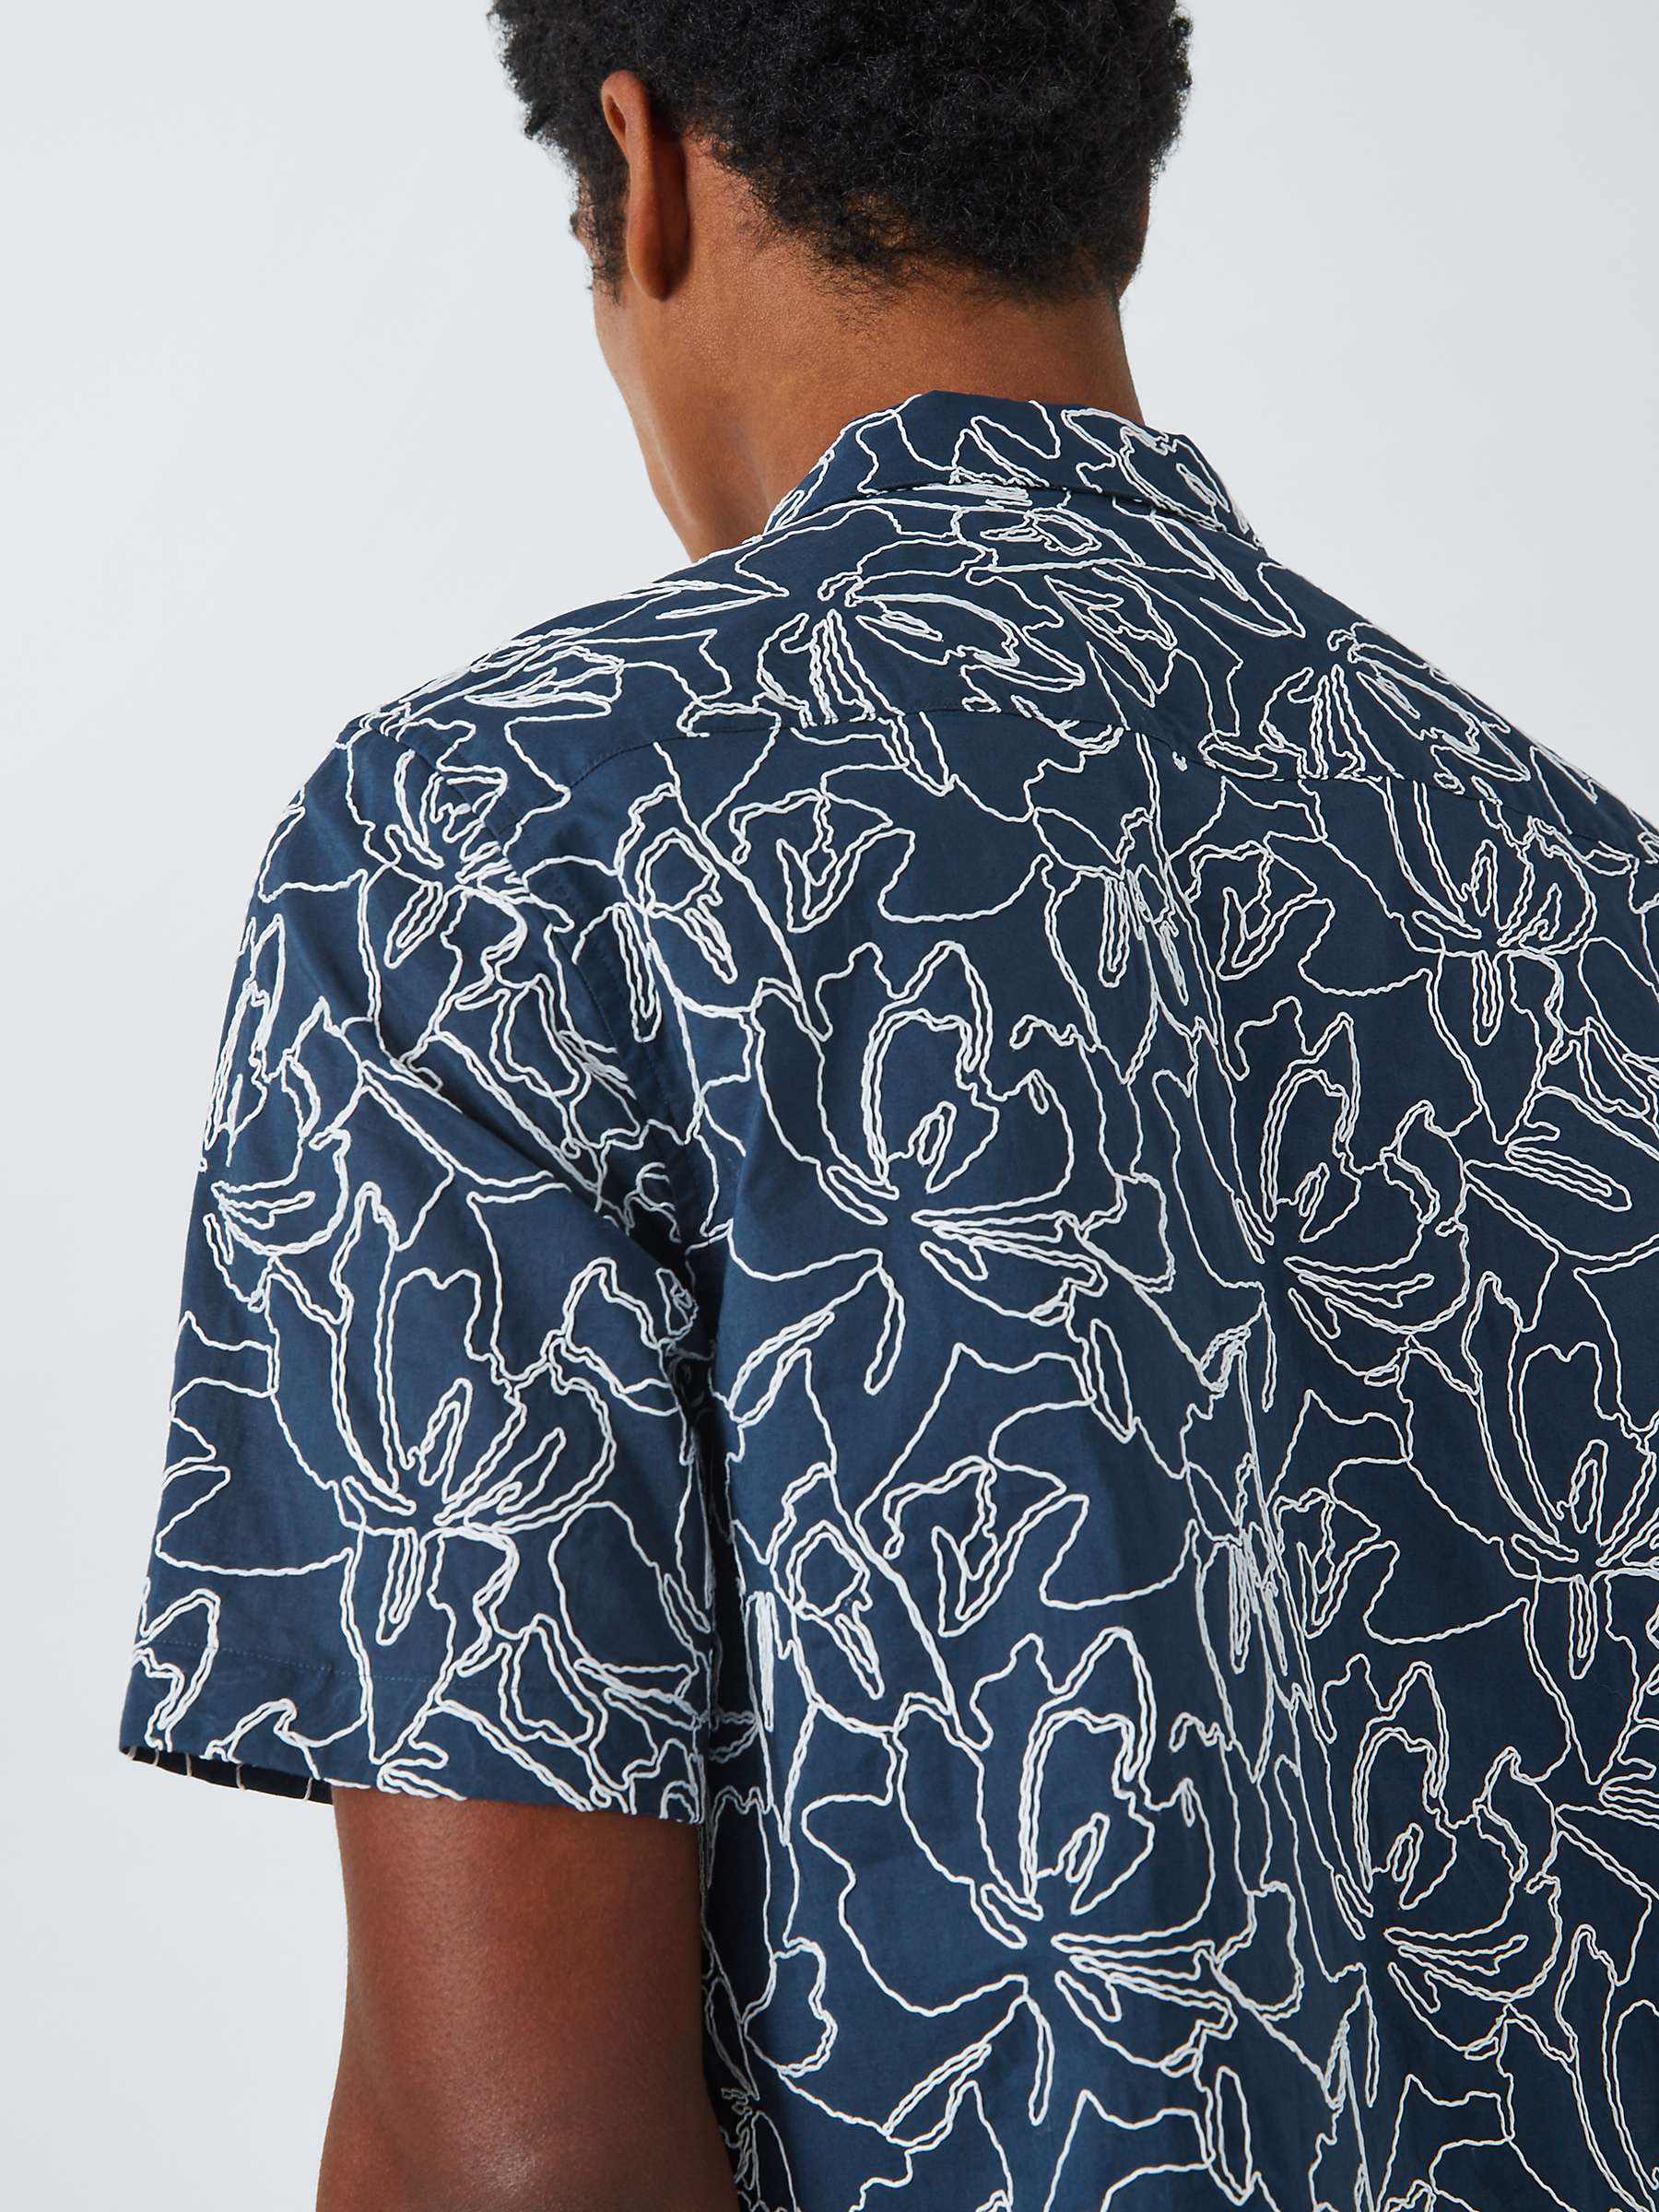 Buy Kin Short Sleeve All Embroidery Shirt, Navy/White Online at johnlewis.com